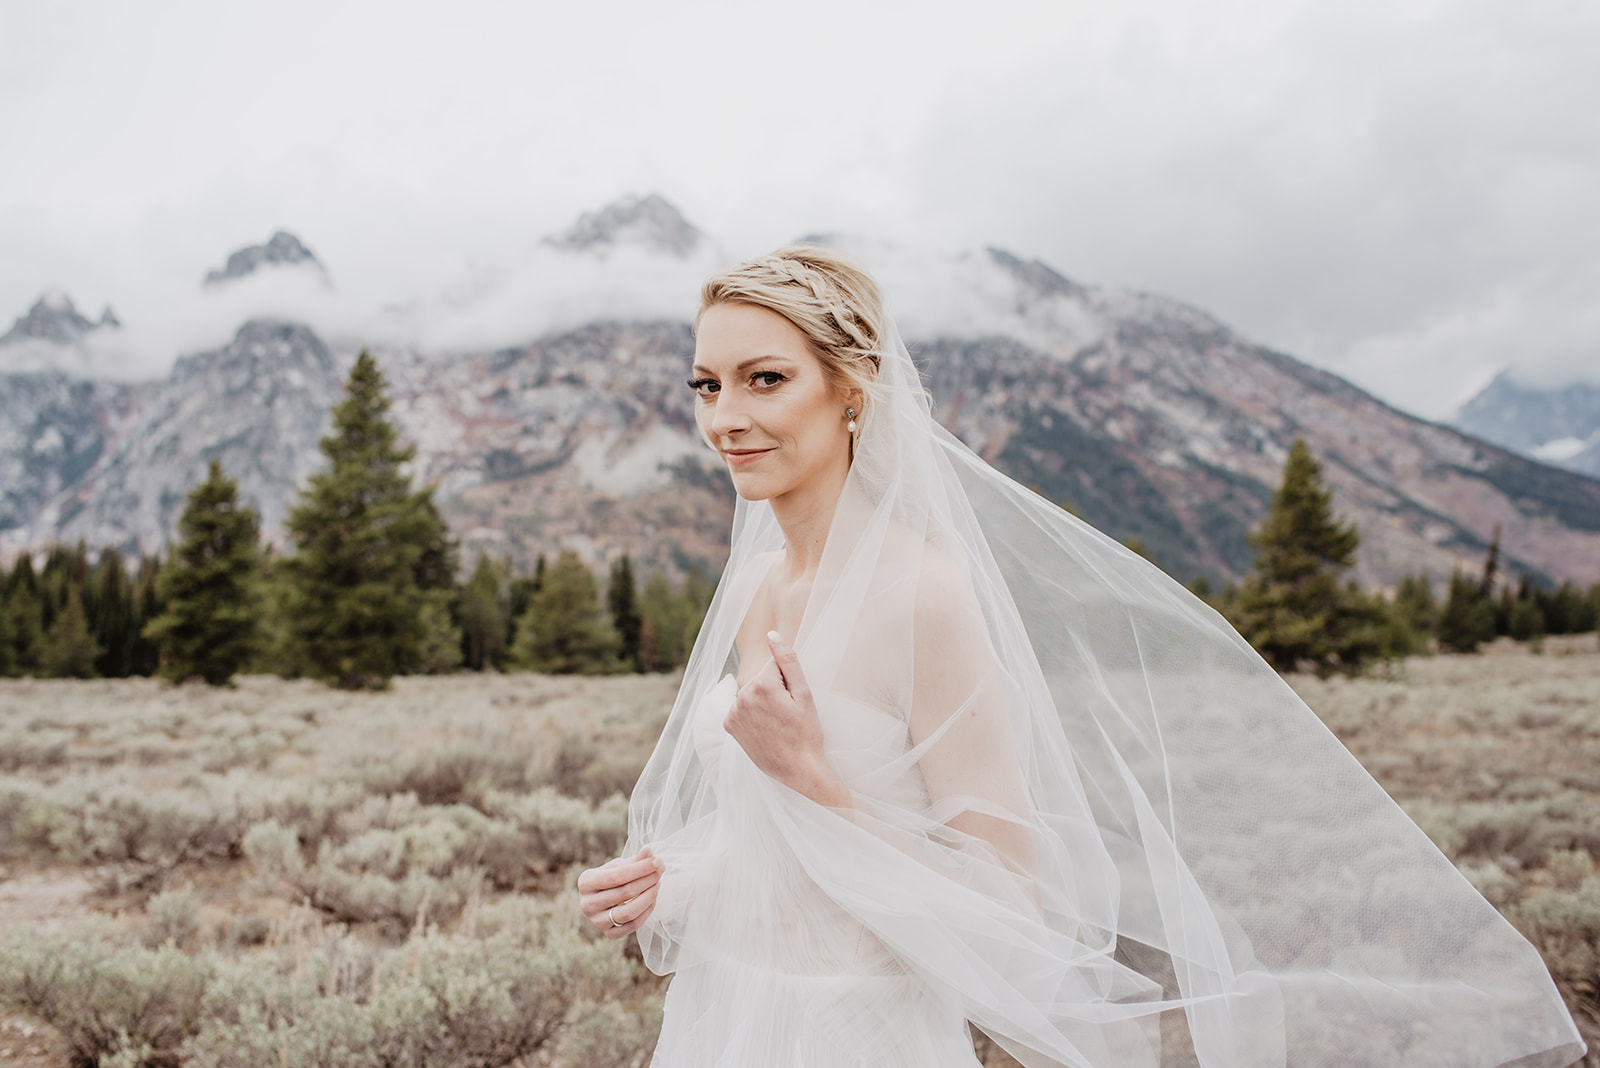 bride standning in fron of the smowy Tetons mountain range smirking at the camera as she holds her veil in place while the wind blows it away from her